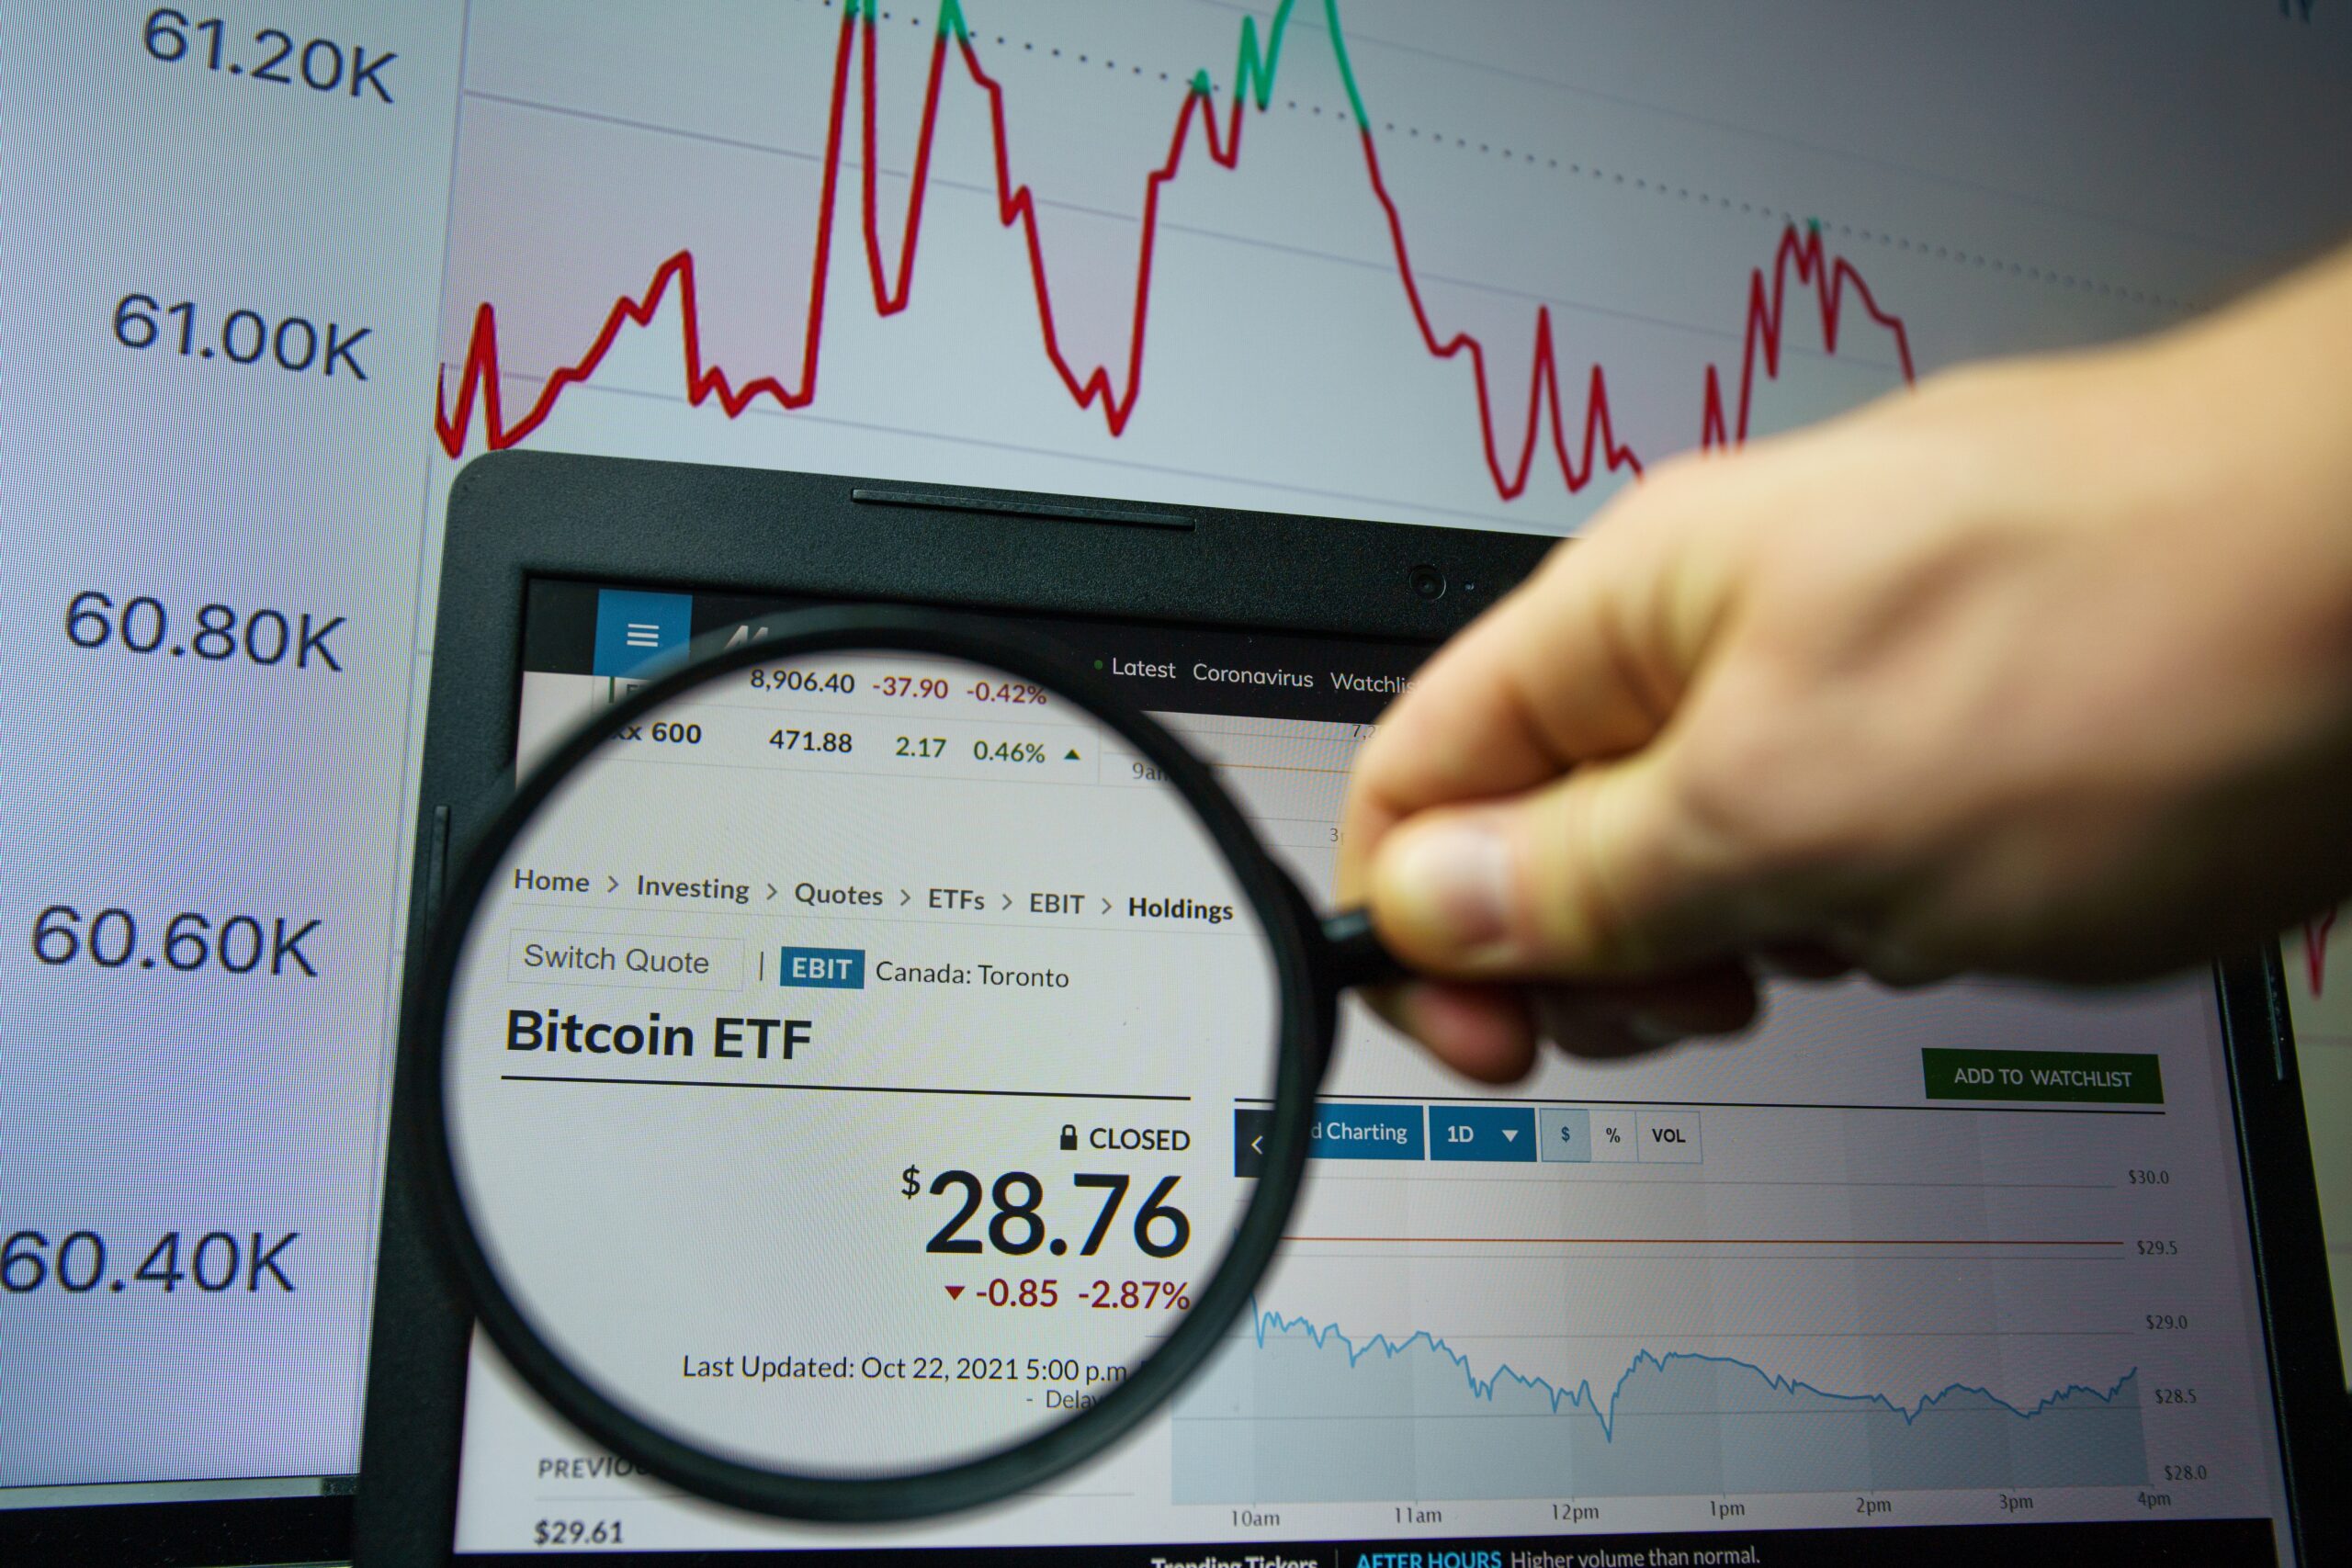 Bitcoin ETF Surge: Analyzing the Data and Implications